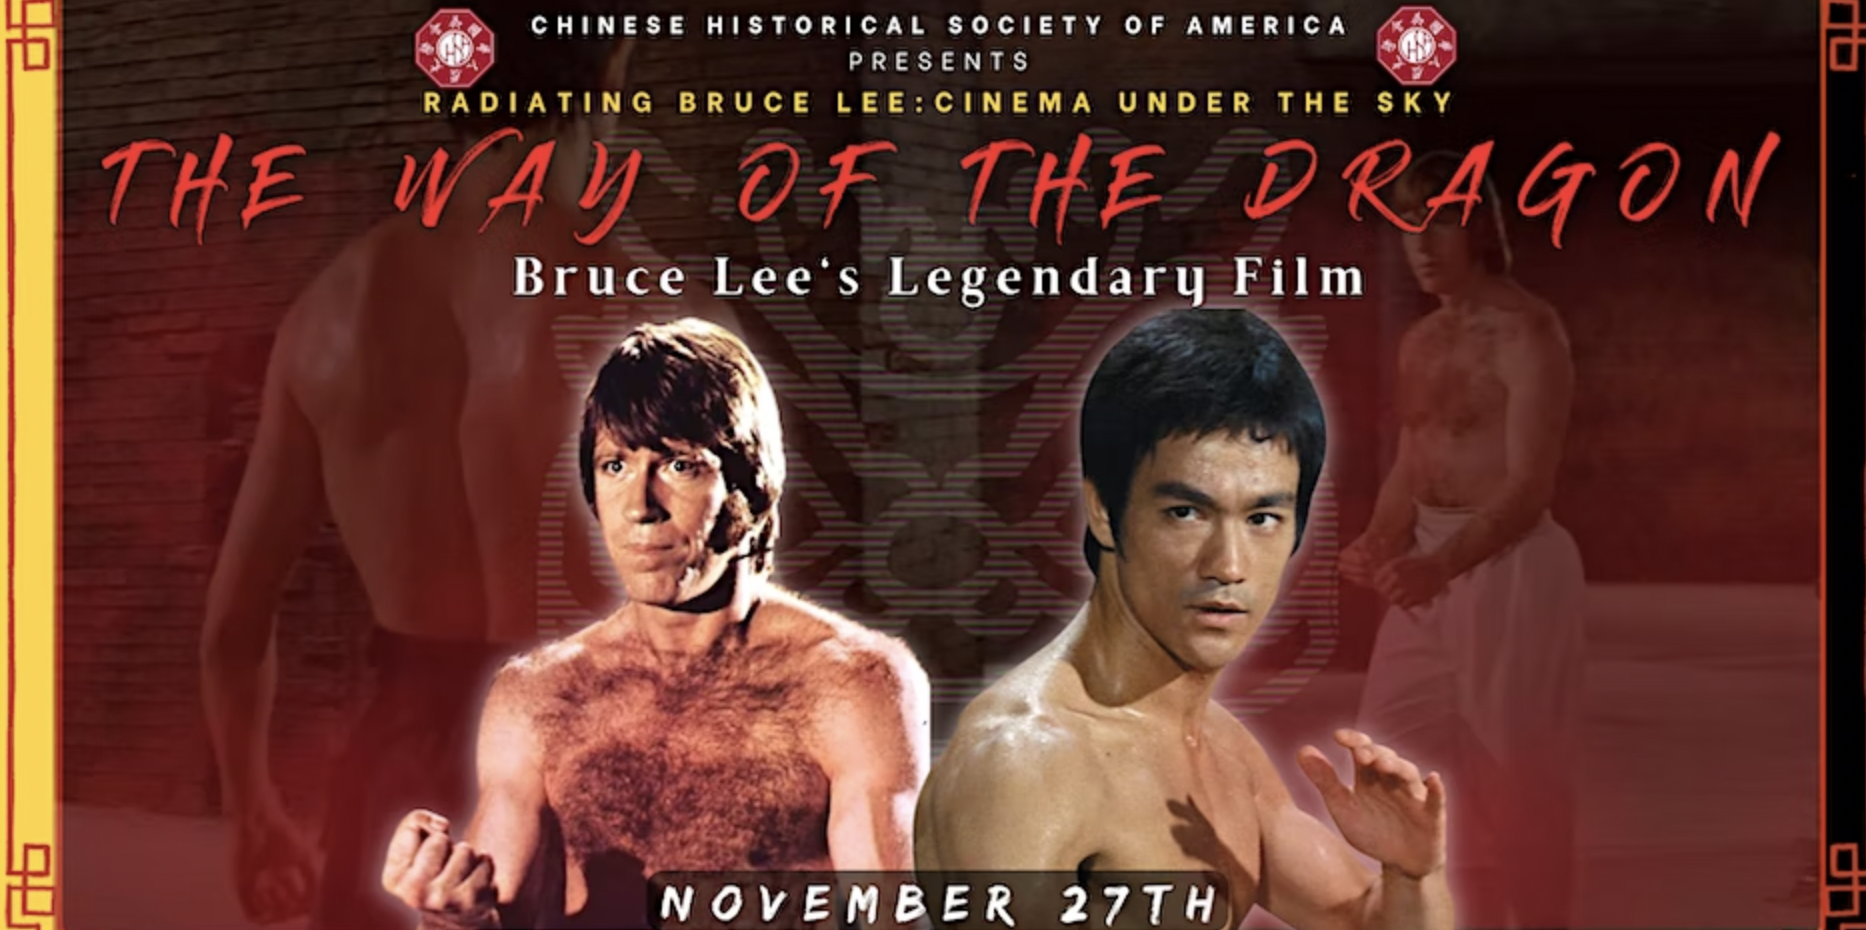 Bruce Lee's 82nd Birthday Celebration: "The Way of the Dragon" Film Screening (SF)